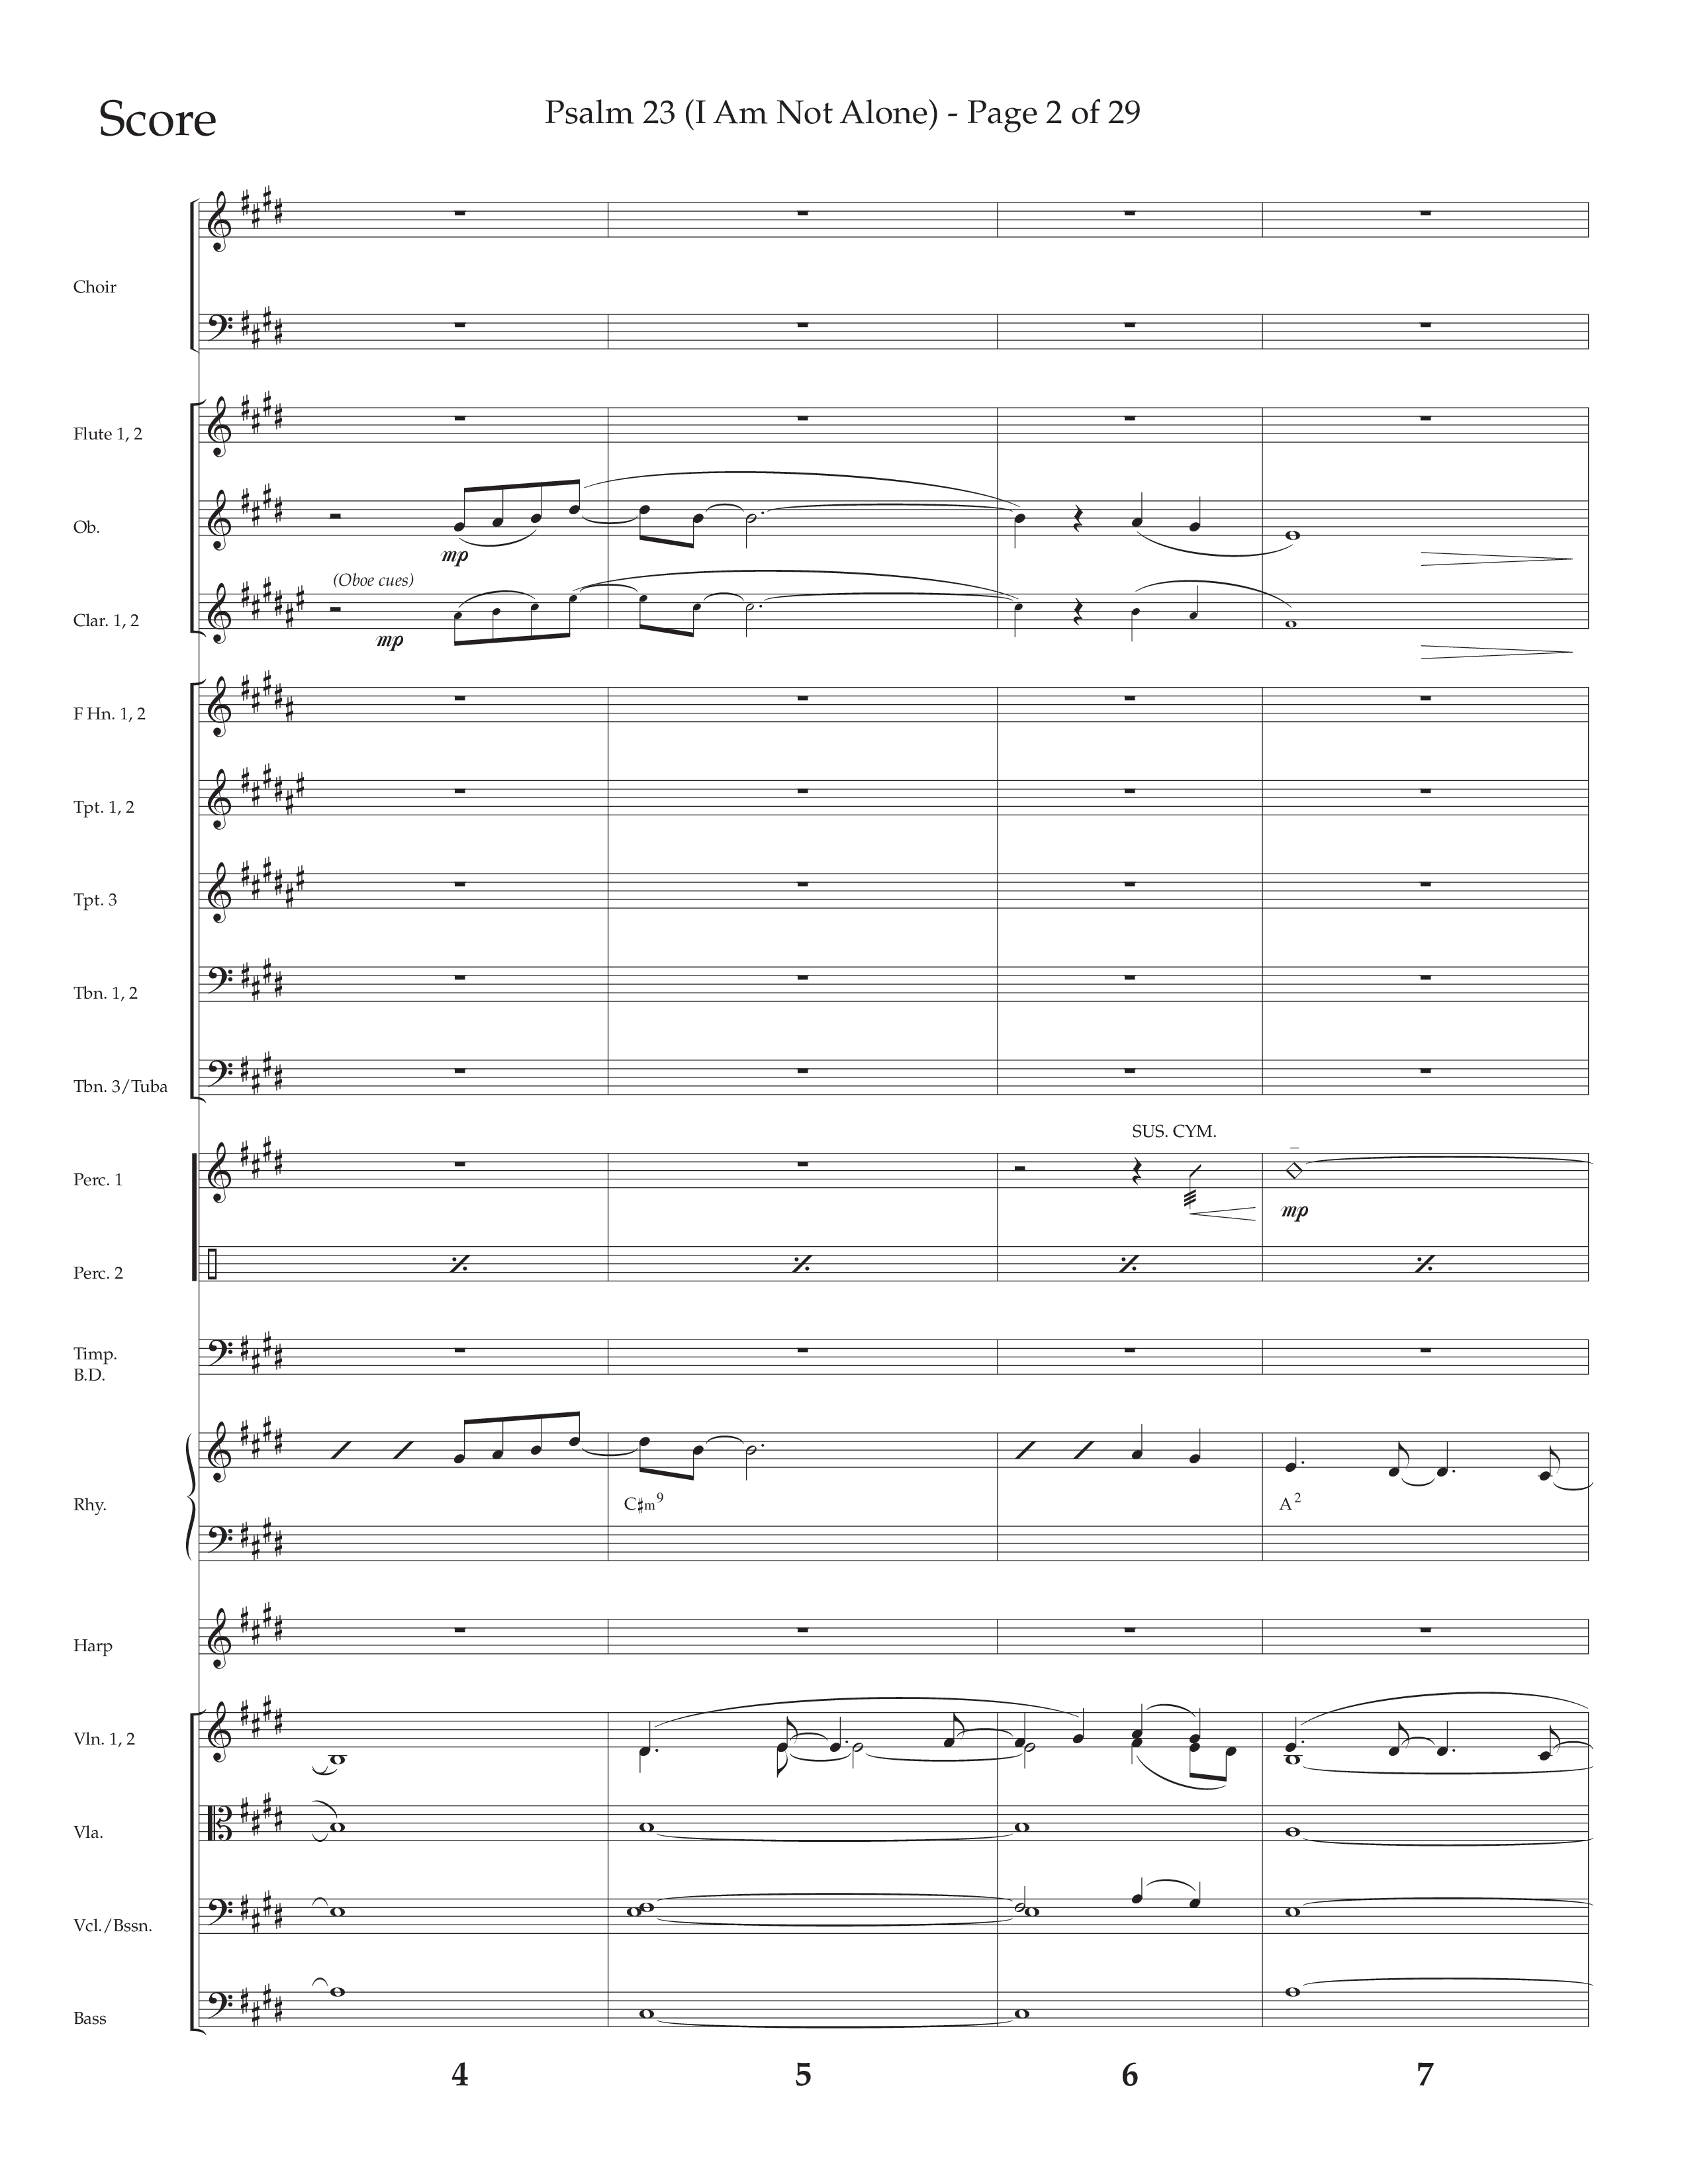 Psalm 23 (I Am Not Alone) (Choral Anthem SATB) Conductor's Score (Lifeway Choral / Arr. Cliff Duren)